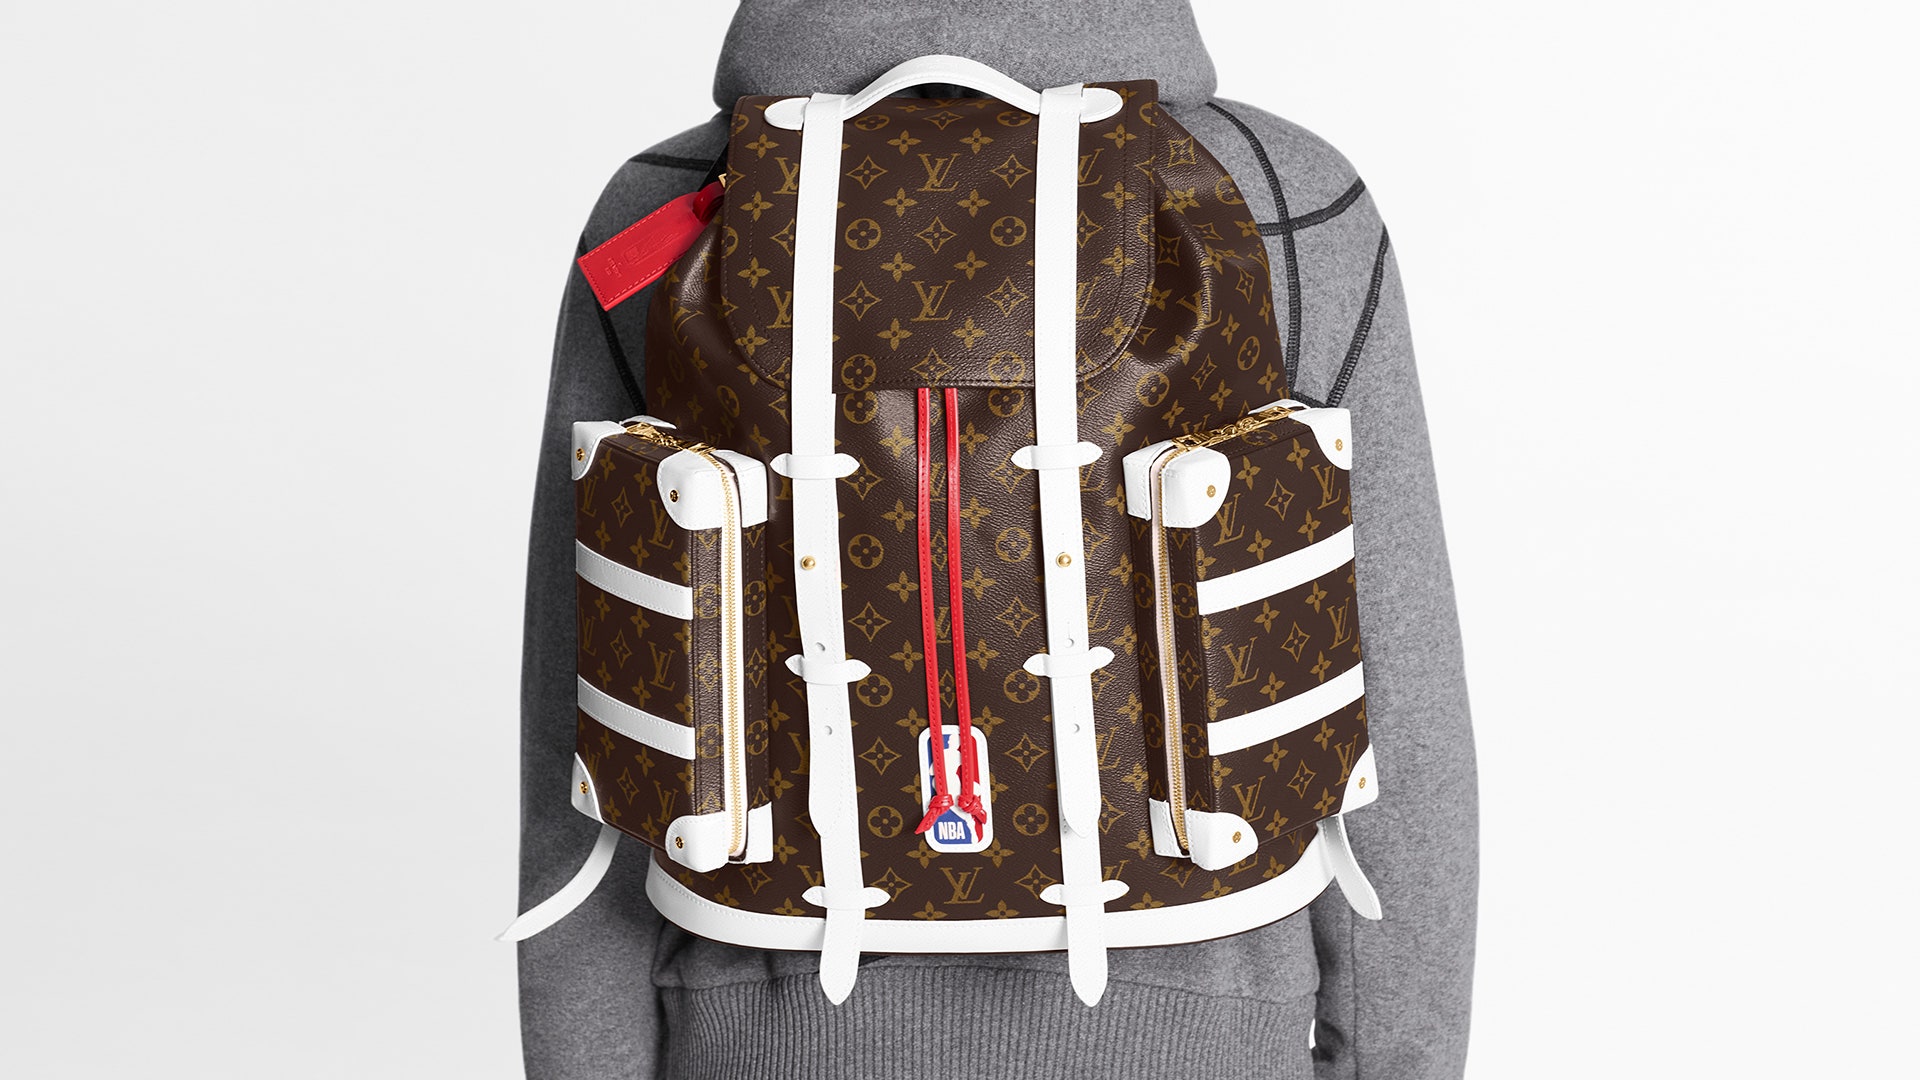 Channel LeBron James with the Louis Vuitton x NBA collection - www.bagssaleusa.com/product-category/neonoe-bag/